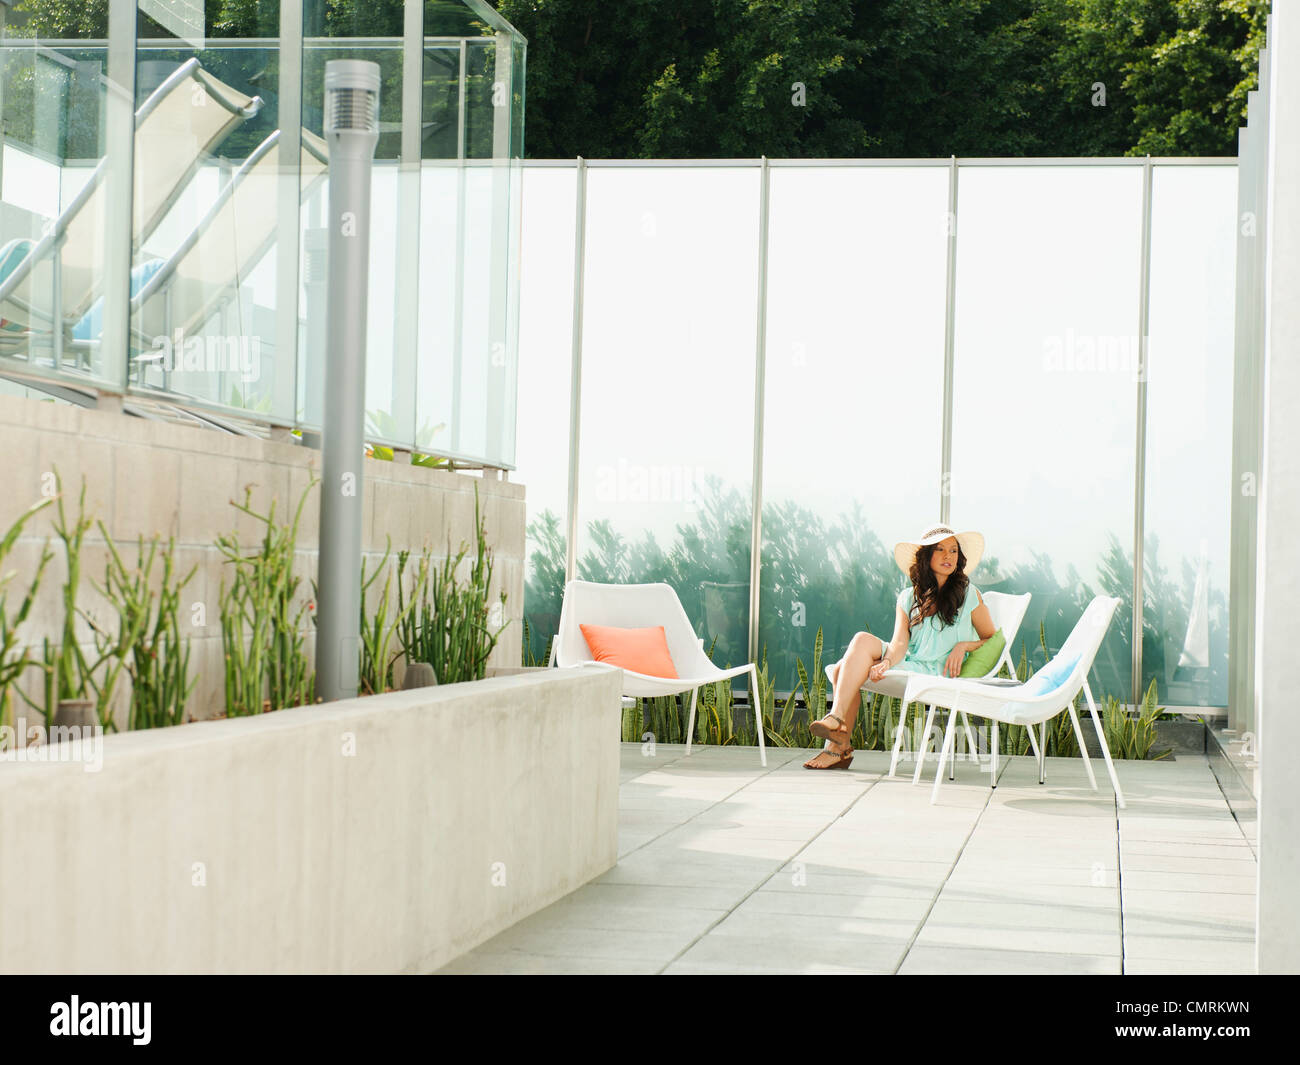 Mixed race woman relaxing on patio Stock Photo